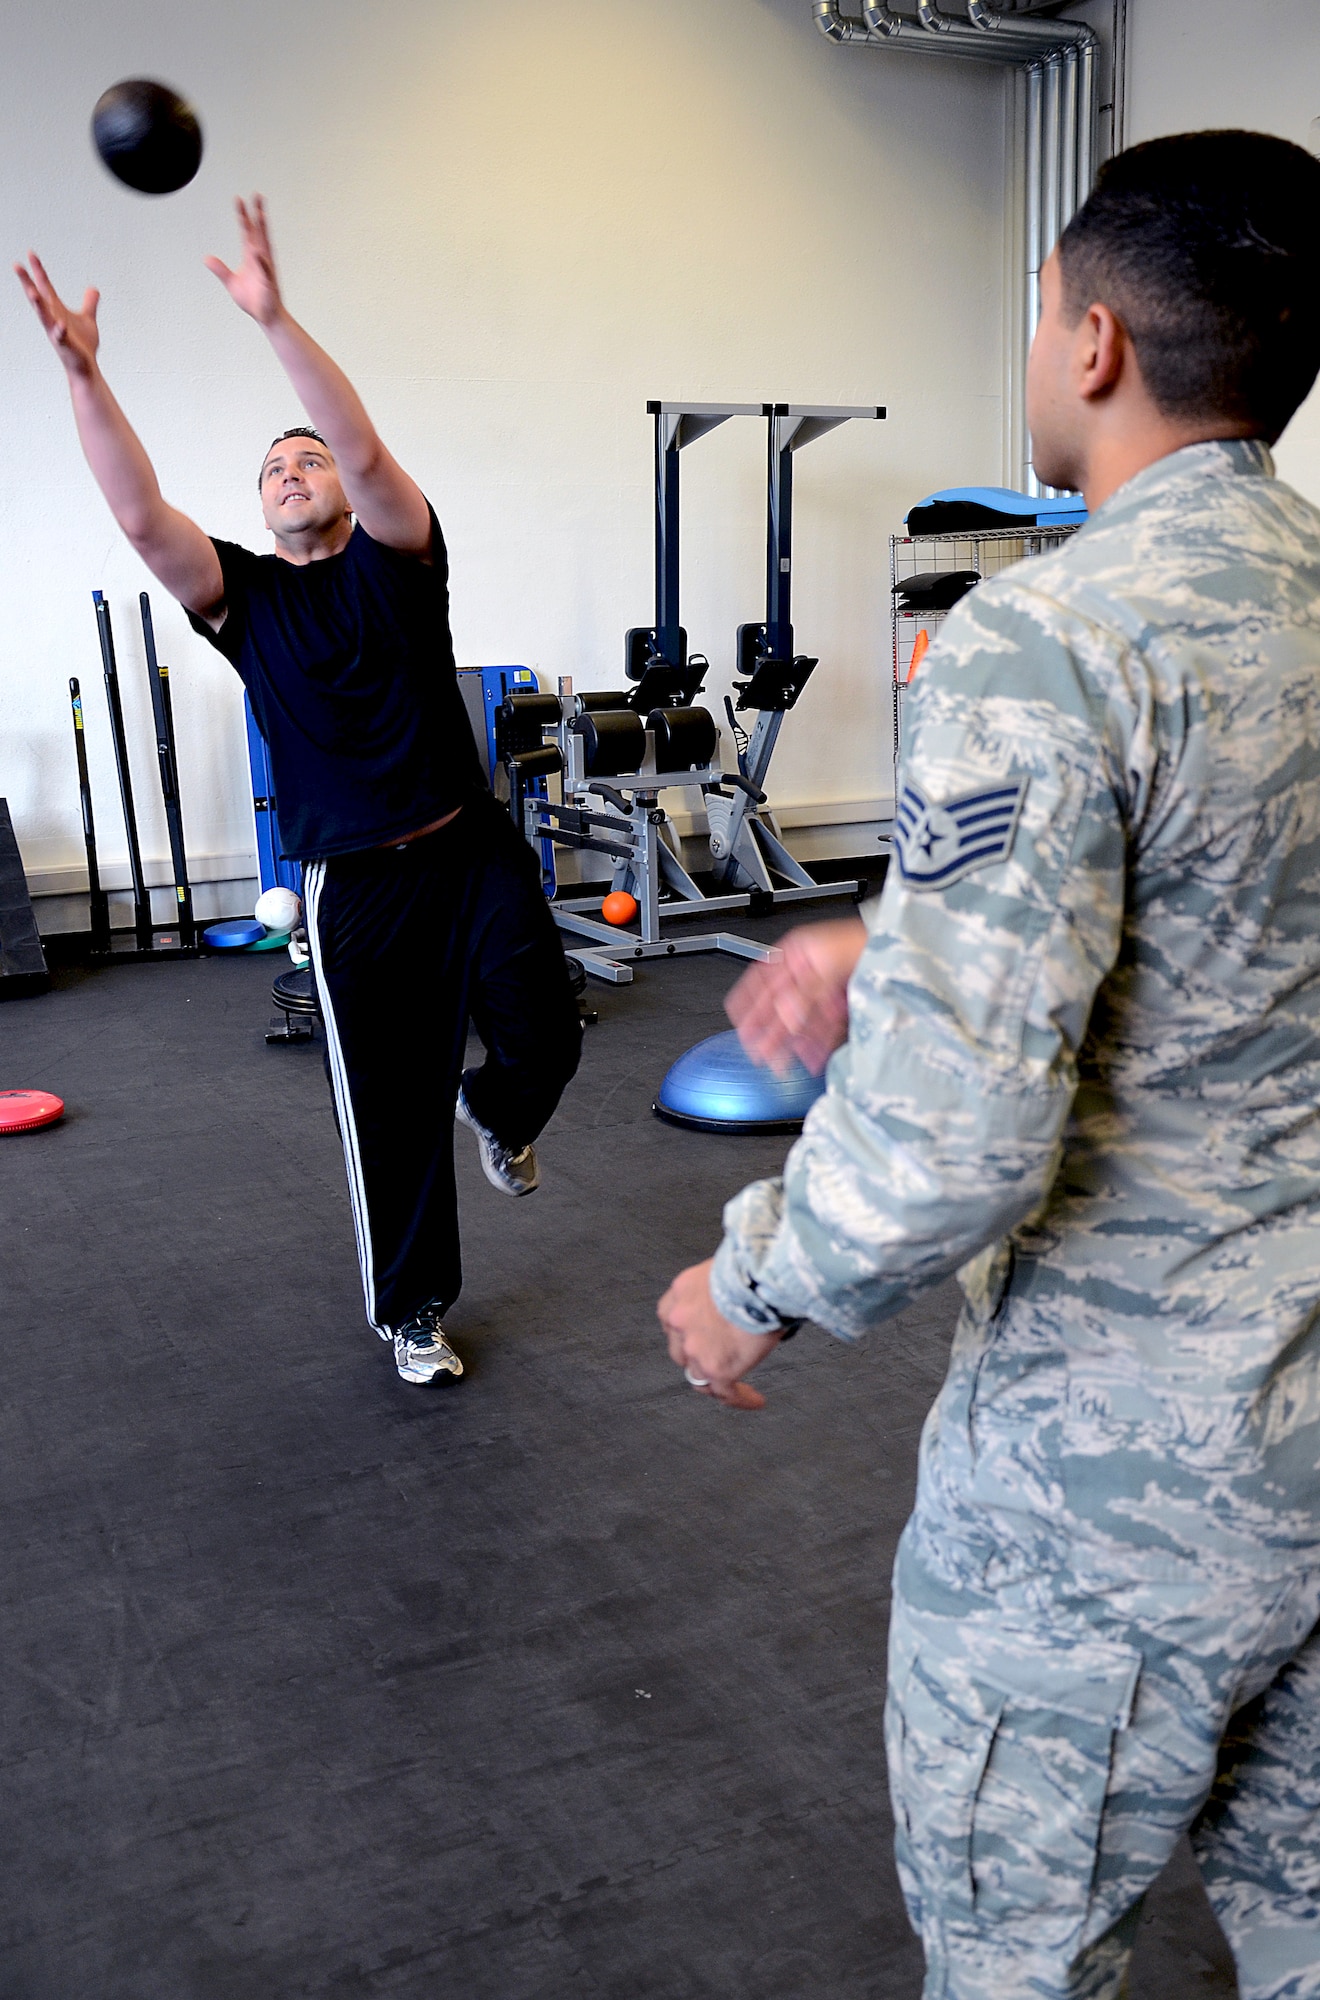 Senior Airman James Harrod, 693rd Intelligence, Surveillance and Reconnaissance Group operations training manager, catches a weighted ball from Staff Sgt. Mario Jimenez, 86th Medical Operations Squadron Physical Therapy technician, during a physical therapy session at Ramstein Air Base, Germany, Aug. 19, 2014. The 86th MDOS physical therapy clinic can see active duty patients for a variety of neuromuscular injuries such as sprains, strains, rehabilitation after the healing of a fracture and many more. (U.S. Air Force photo/Senior Airman Timothy Moore)